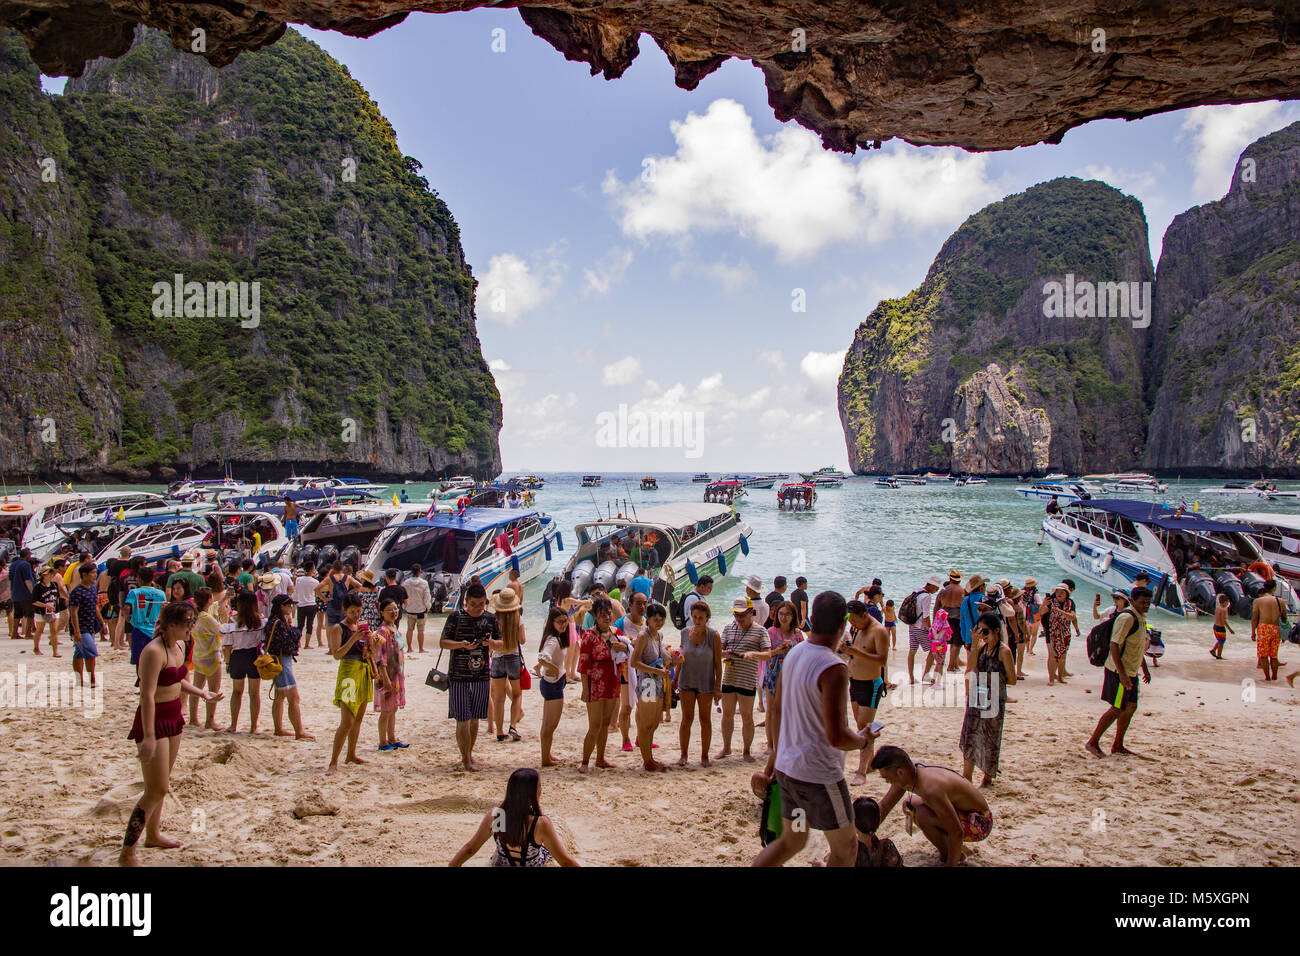 Maya Bay Beach, Ko Phi Phi Le Island, Thailand, are overcrowded with tourists because it is now a honeypot or bucket list tourism destination Stock Photo